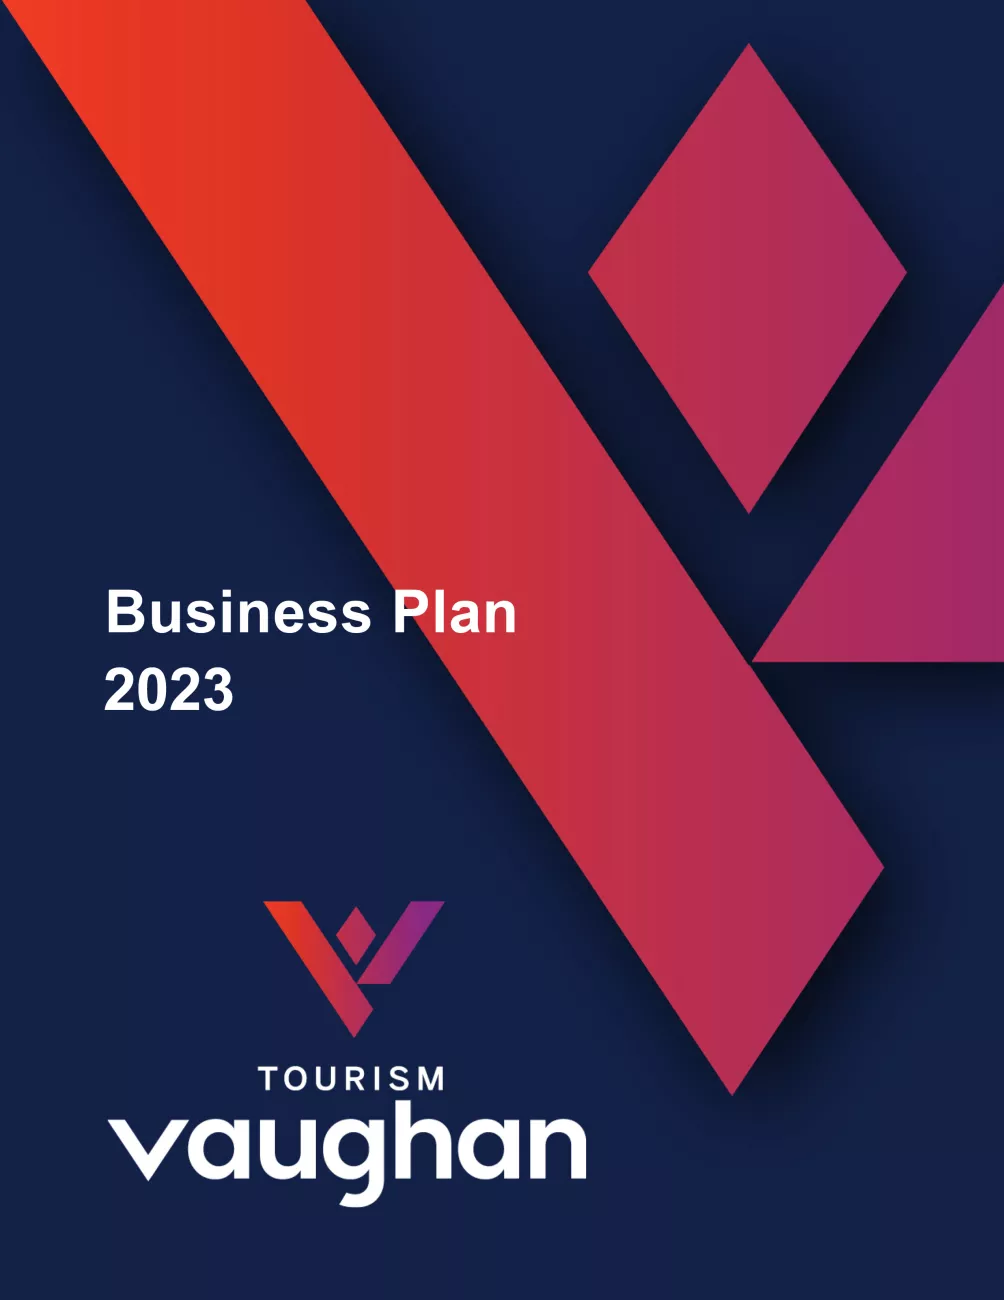 Cover page with the Tourism Vaughan logo. Title: 2023 Business Plan.